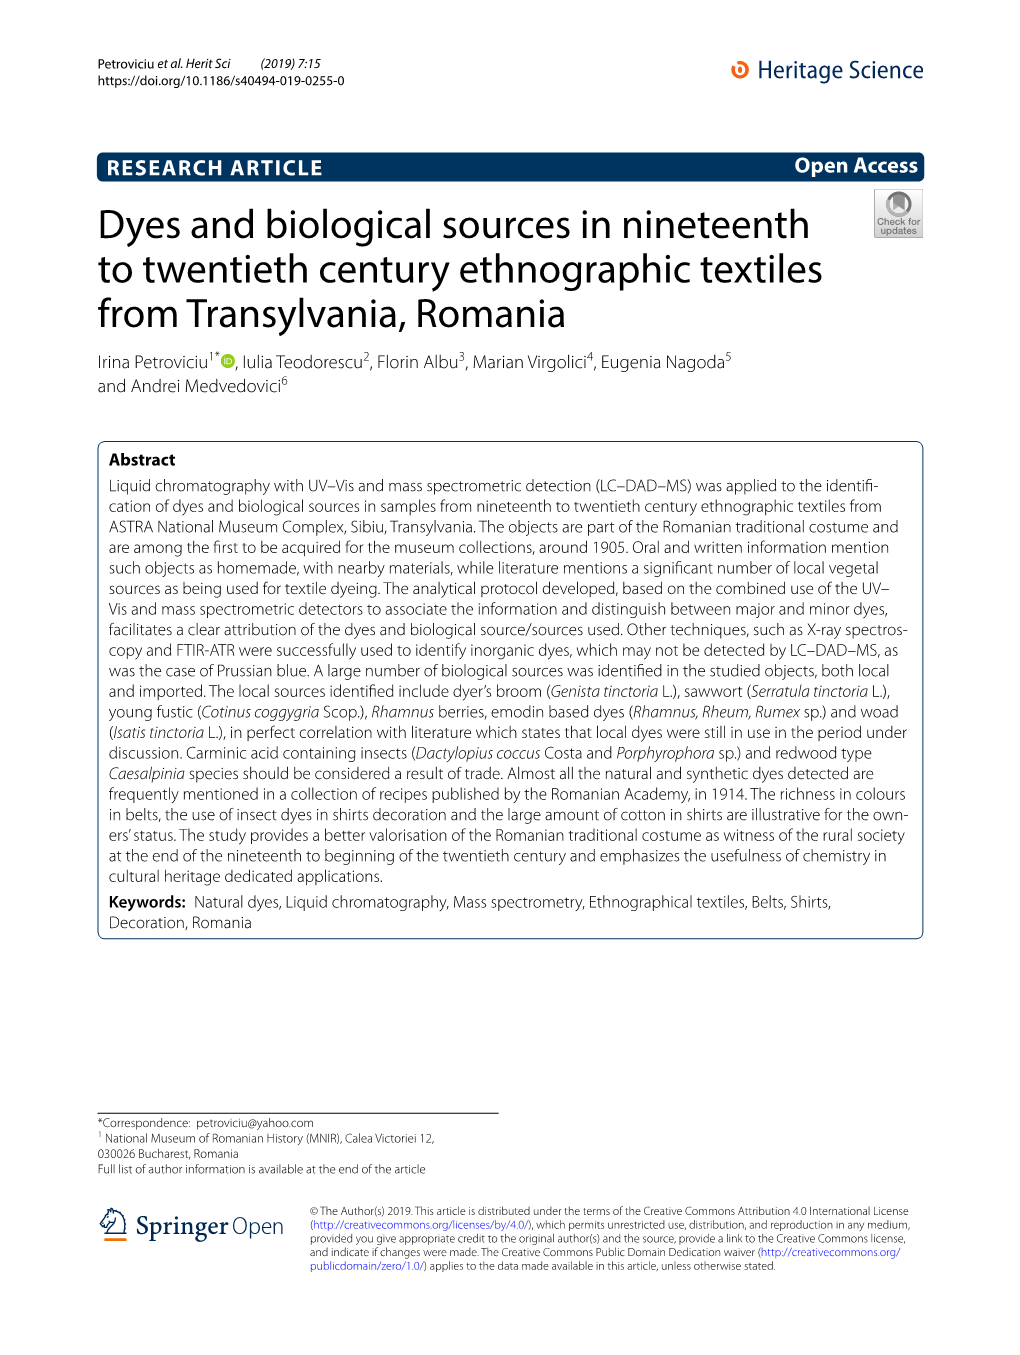 Dyes and Biological Sources in Nineteenth to Twentieth Century